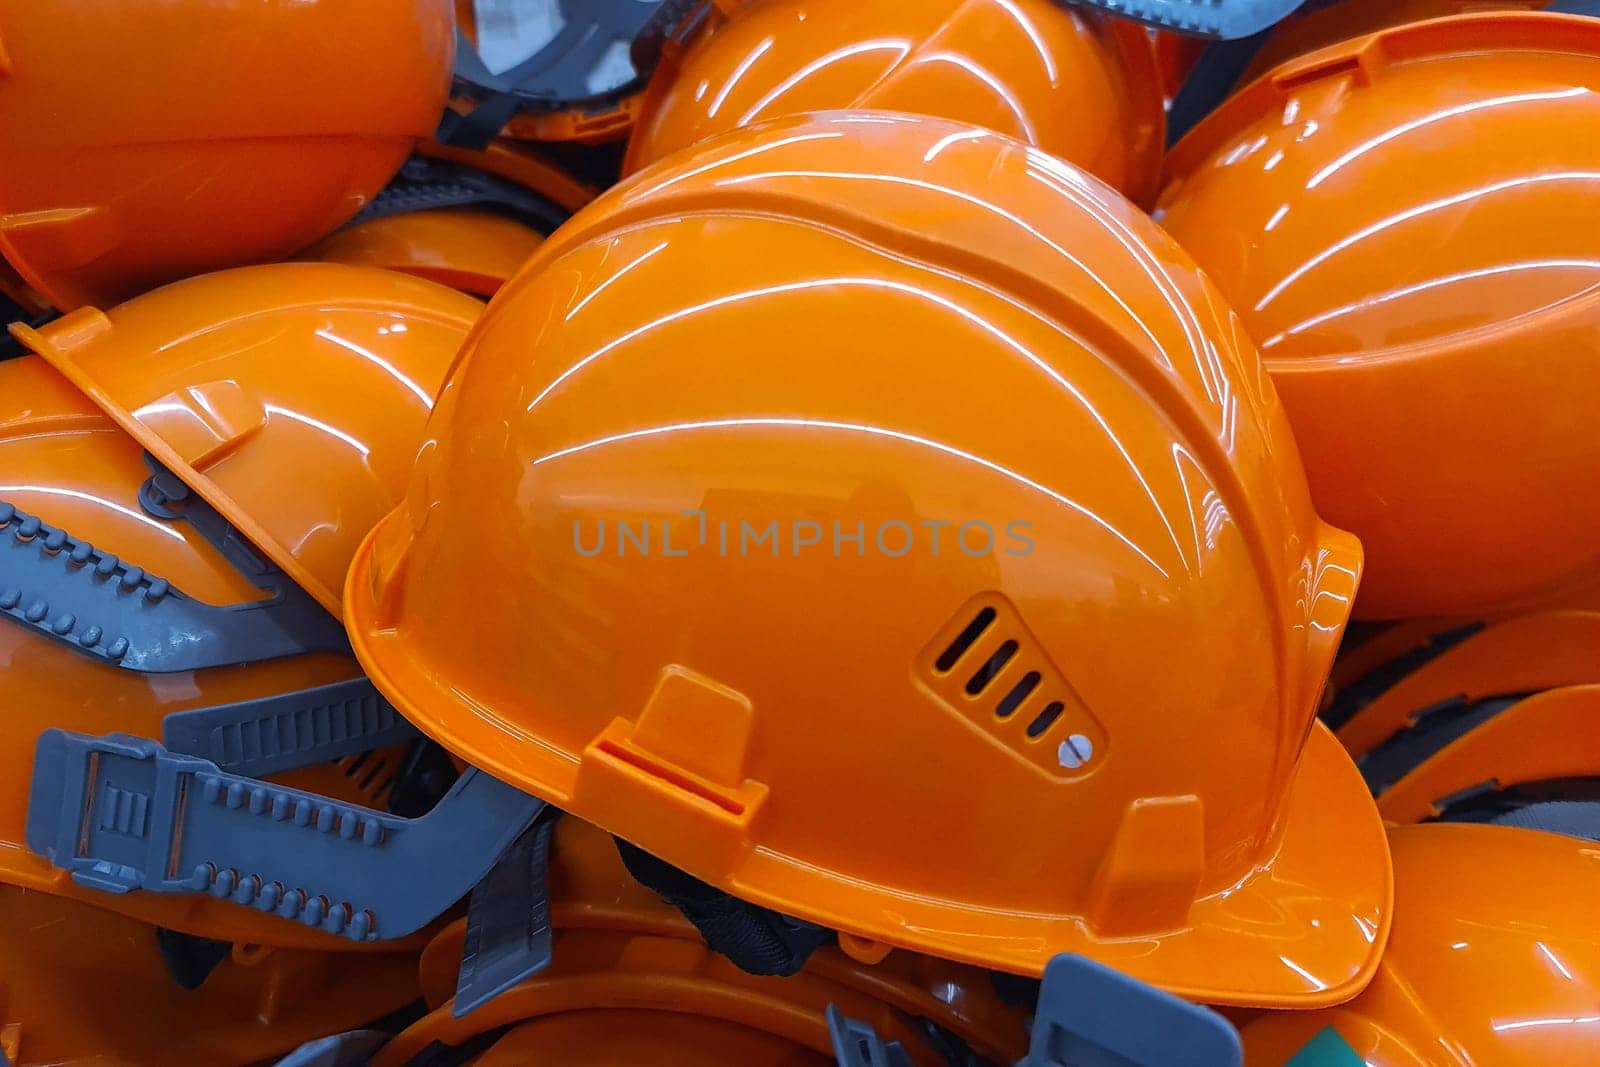 An orange work helmet lies among other similar helmets of general workers.. Construction safety worker equipment.